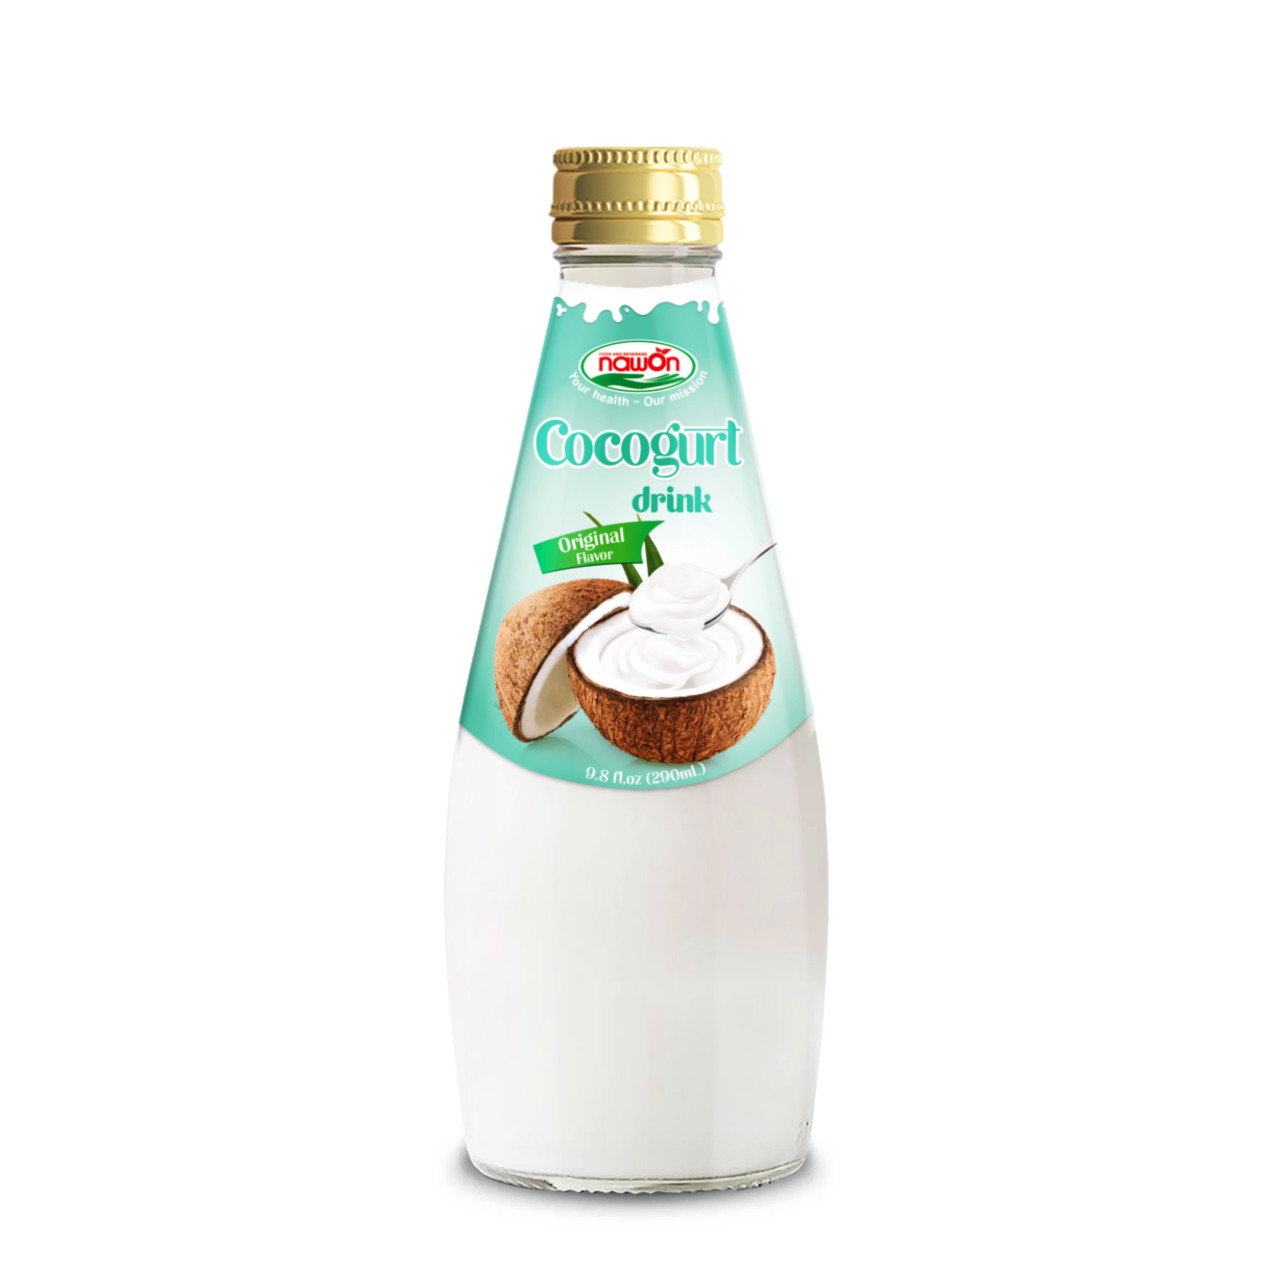 Is Coconut Milk With Nata De Coco Good For You?